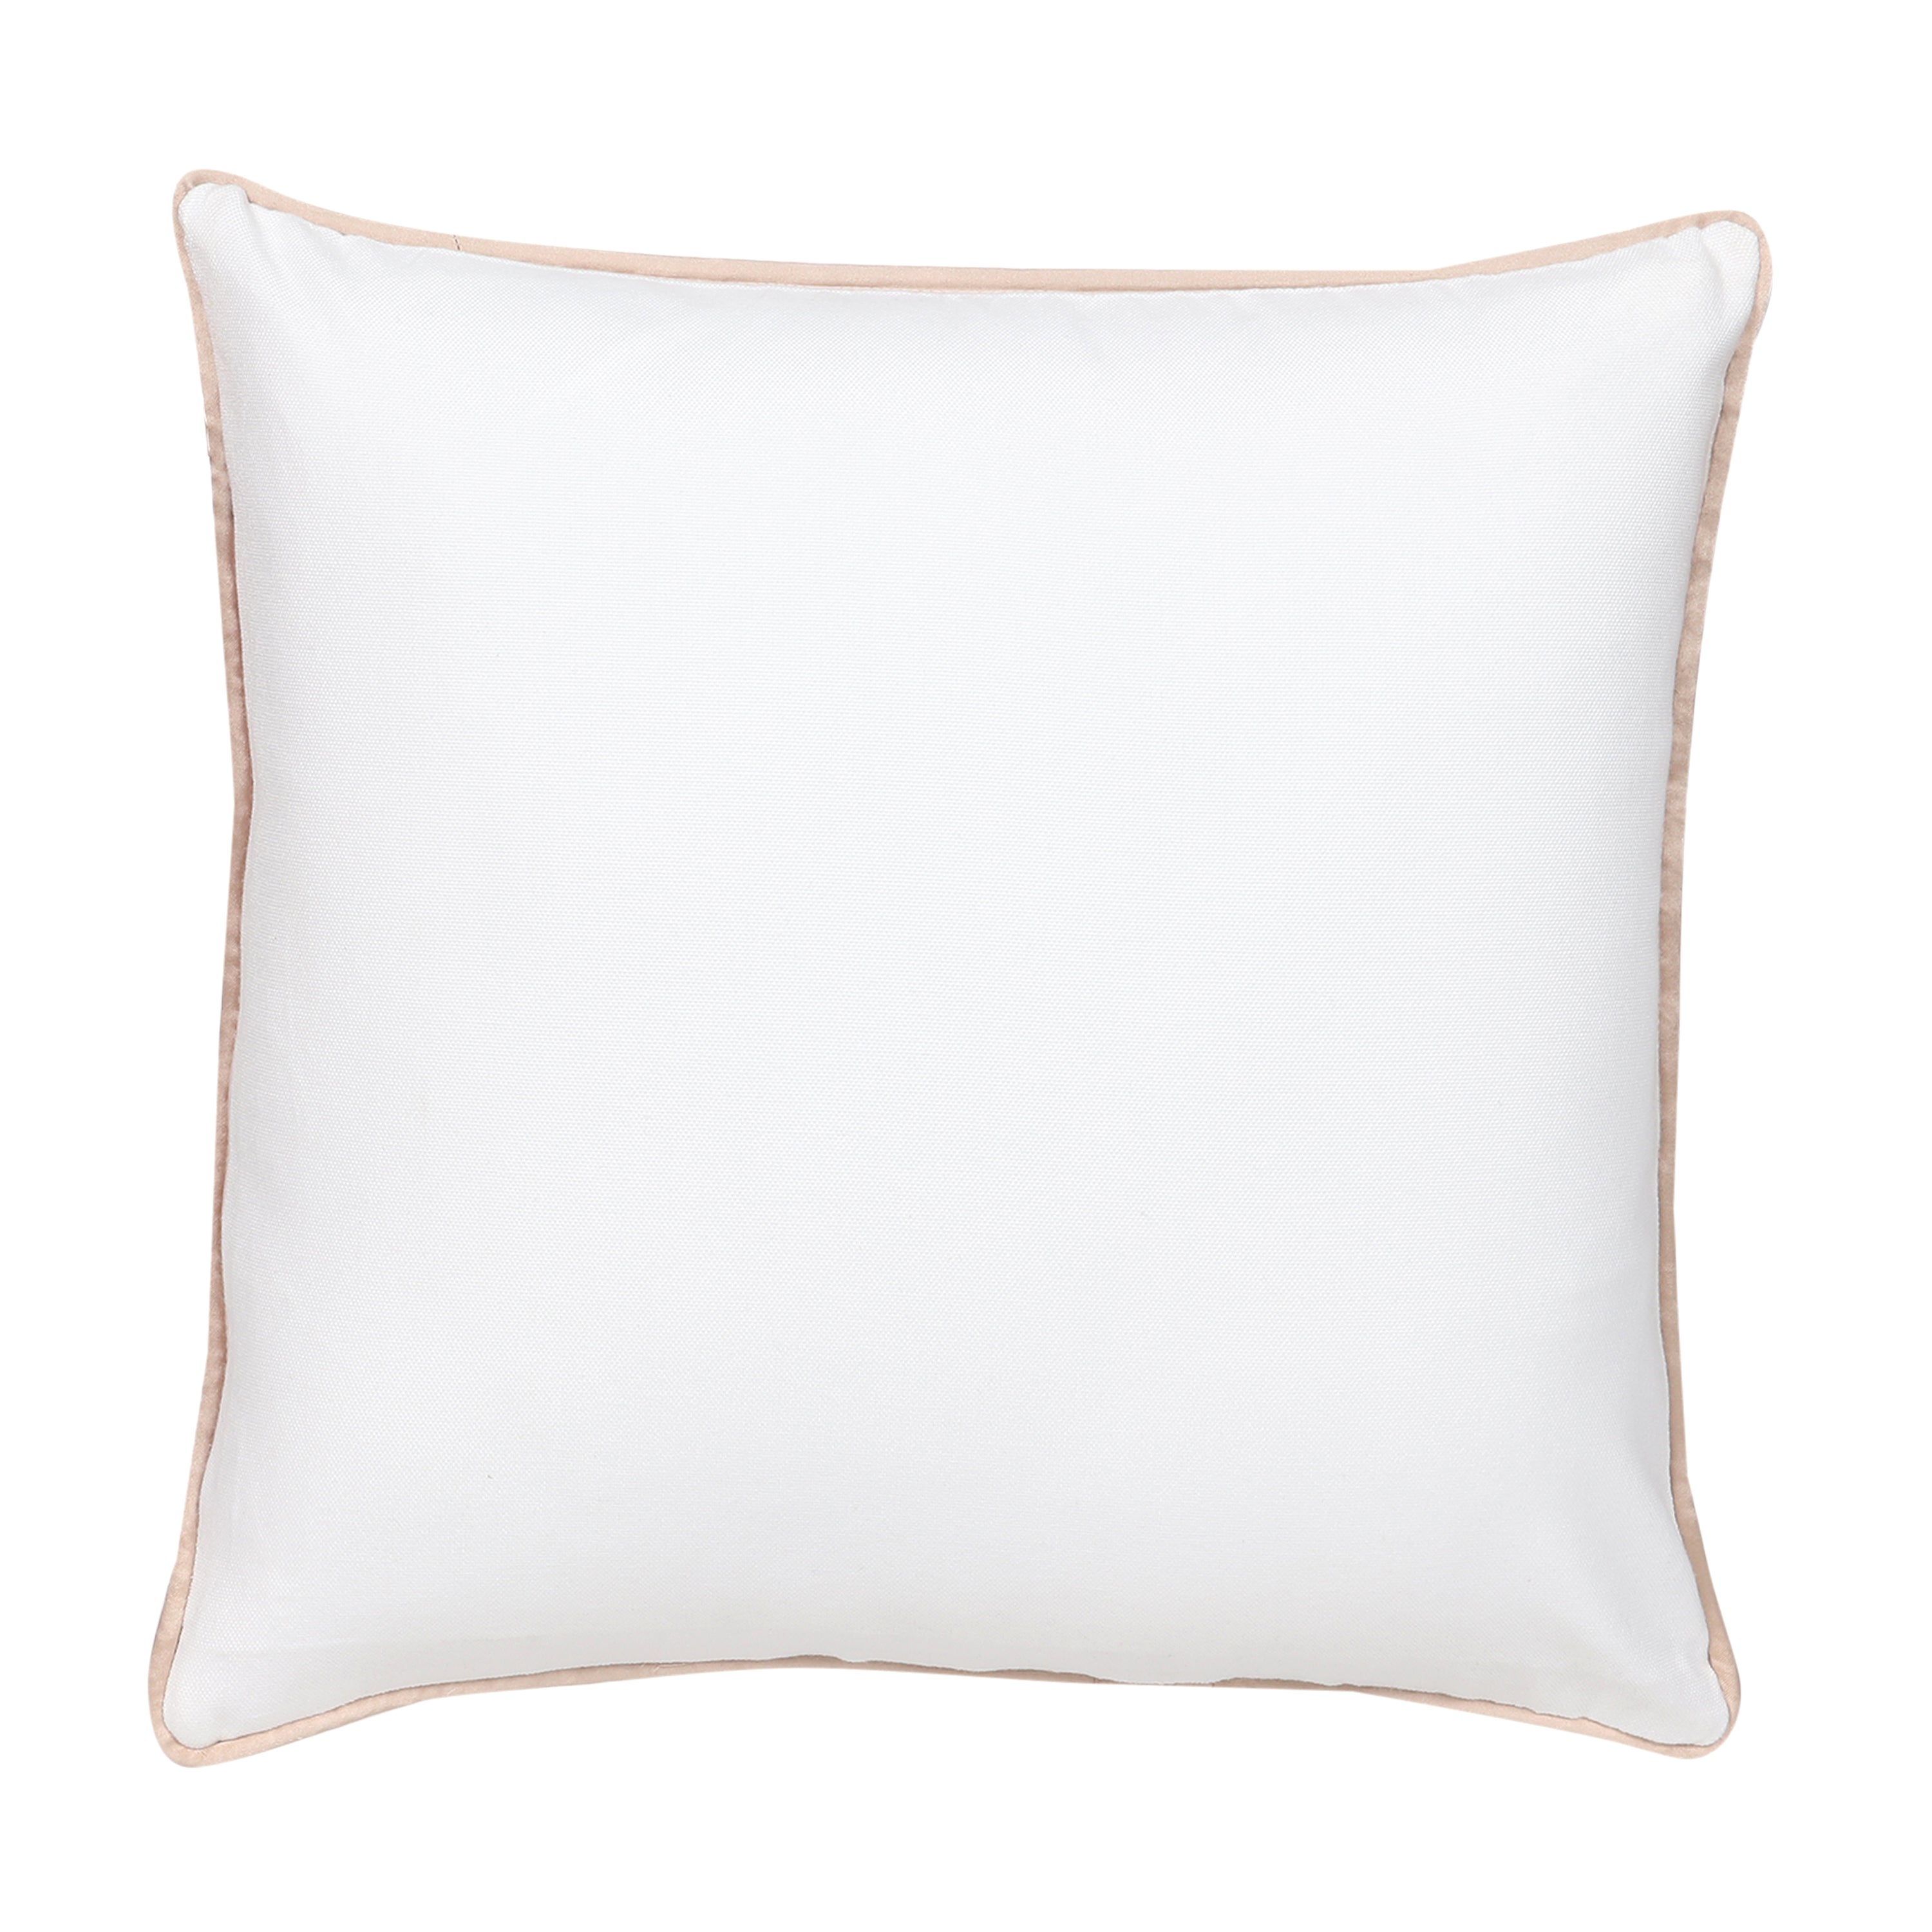 Line Art Embroidered Cushion Cover - Fierce and Fearless